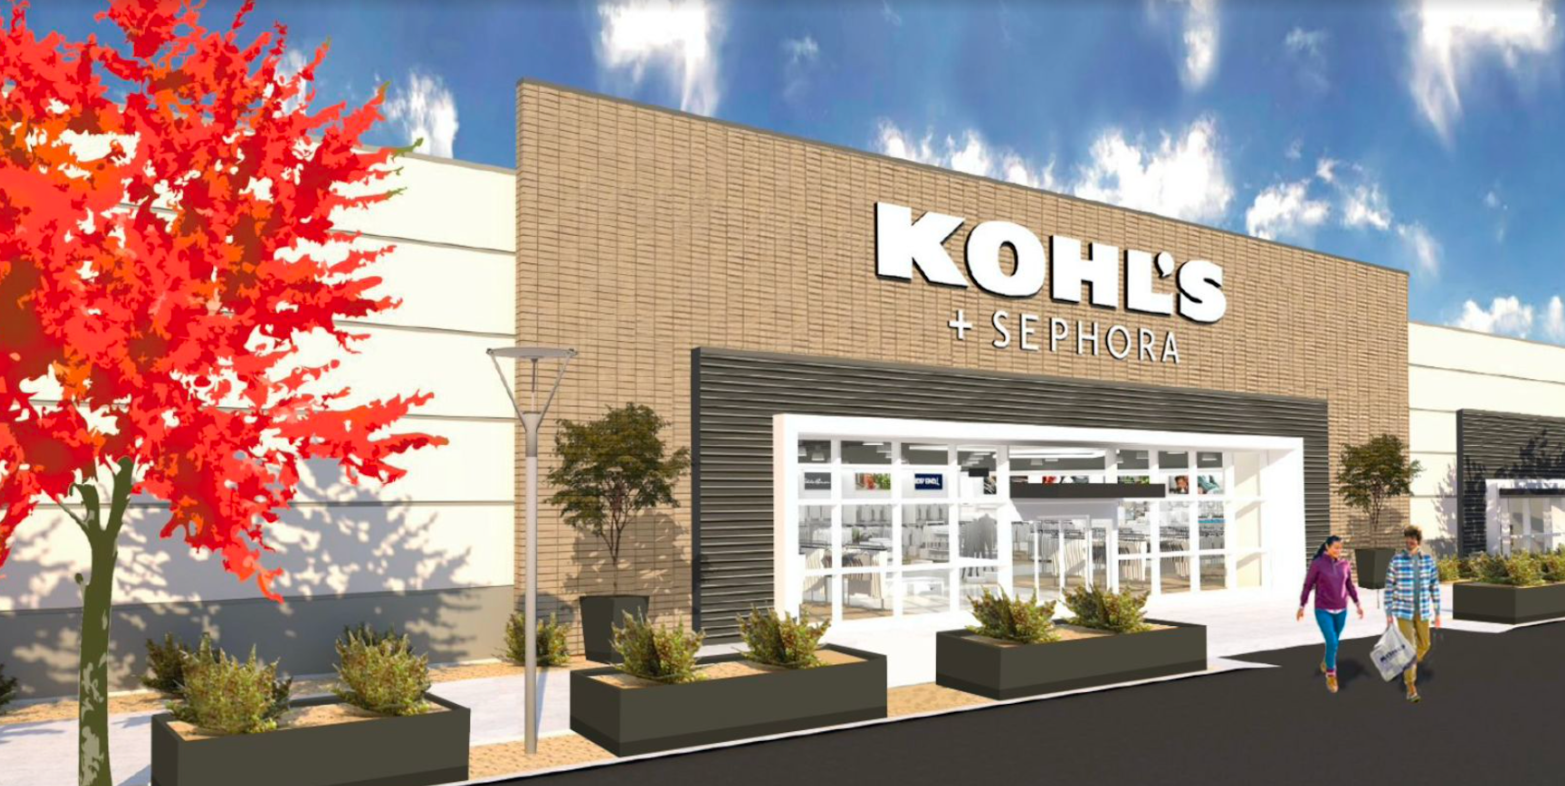 Kohl's latest turnaround plan bets on athleisure and national